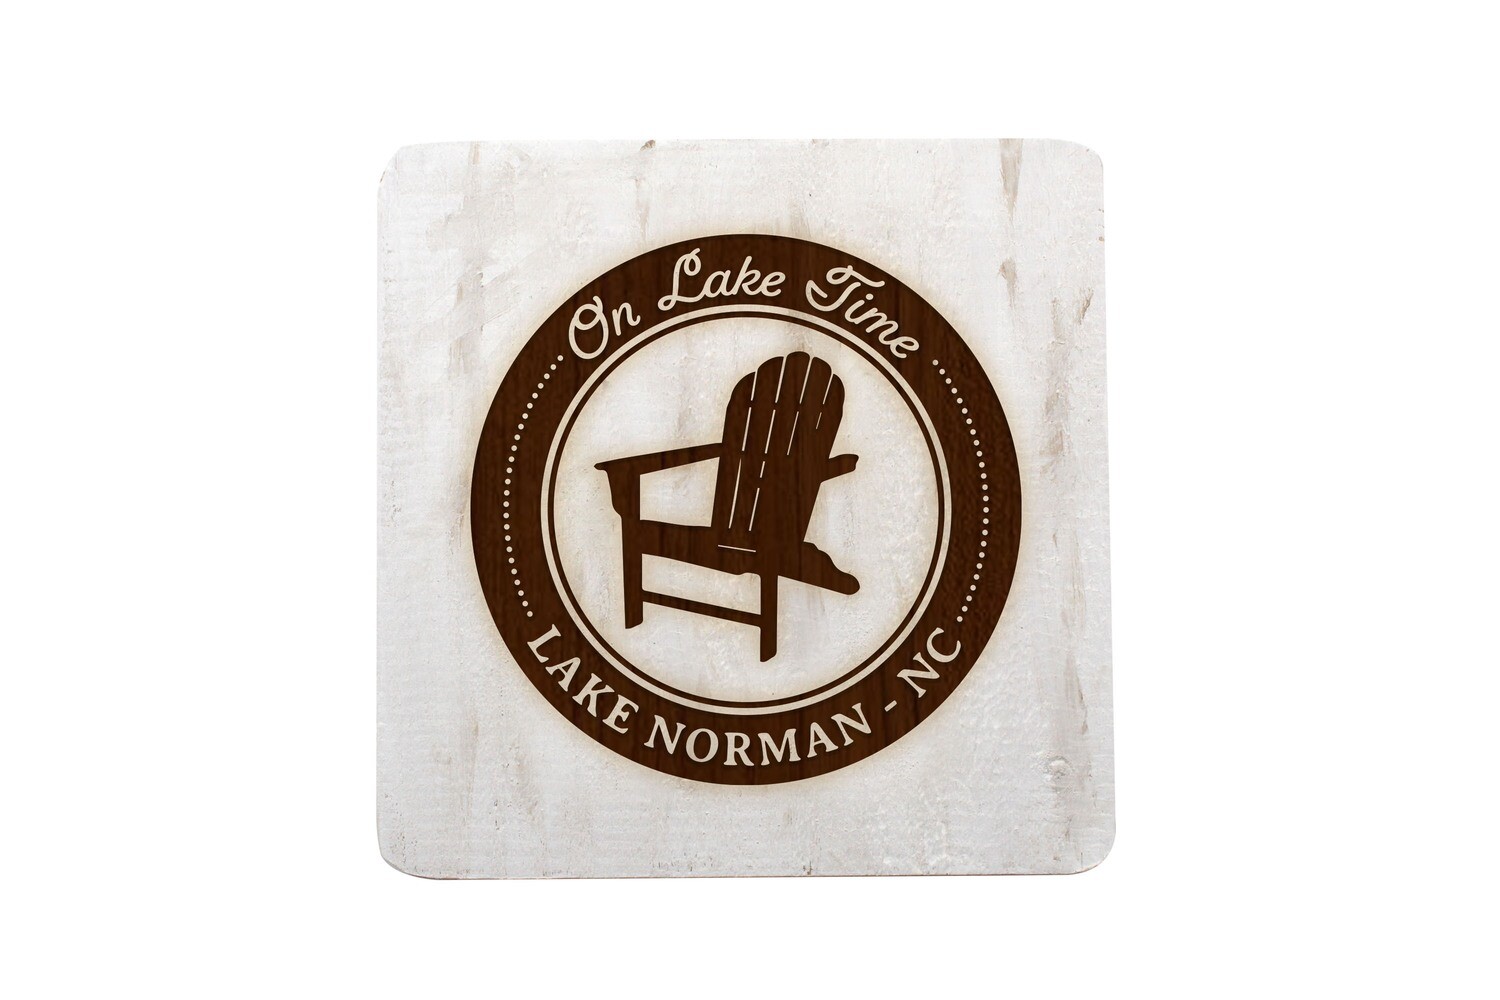 On Lake Time w/Chair & Customized Location Hand-Painted Wood Coaster Set